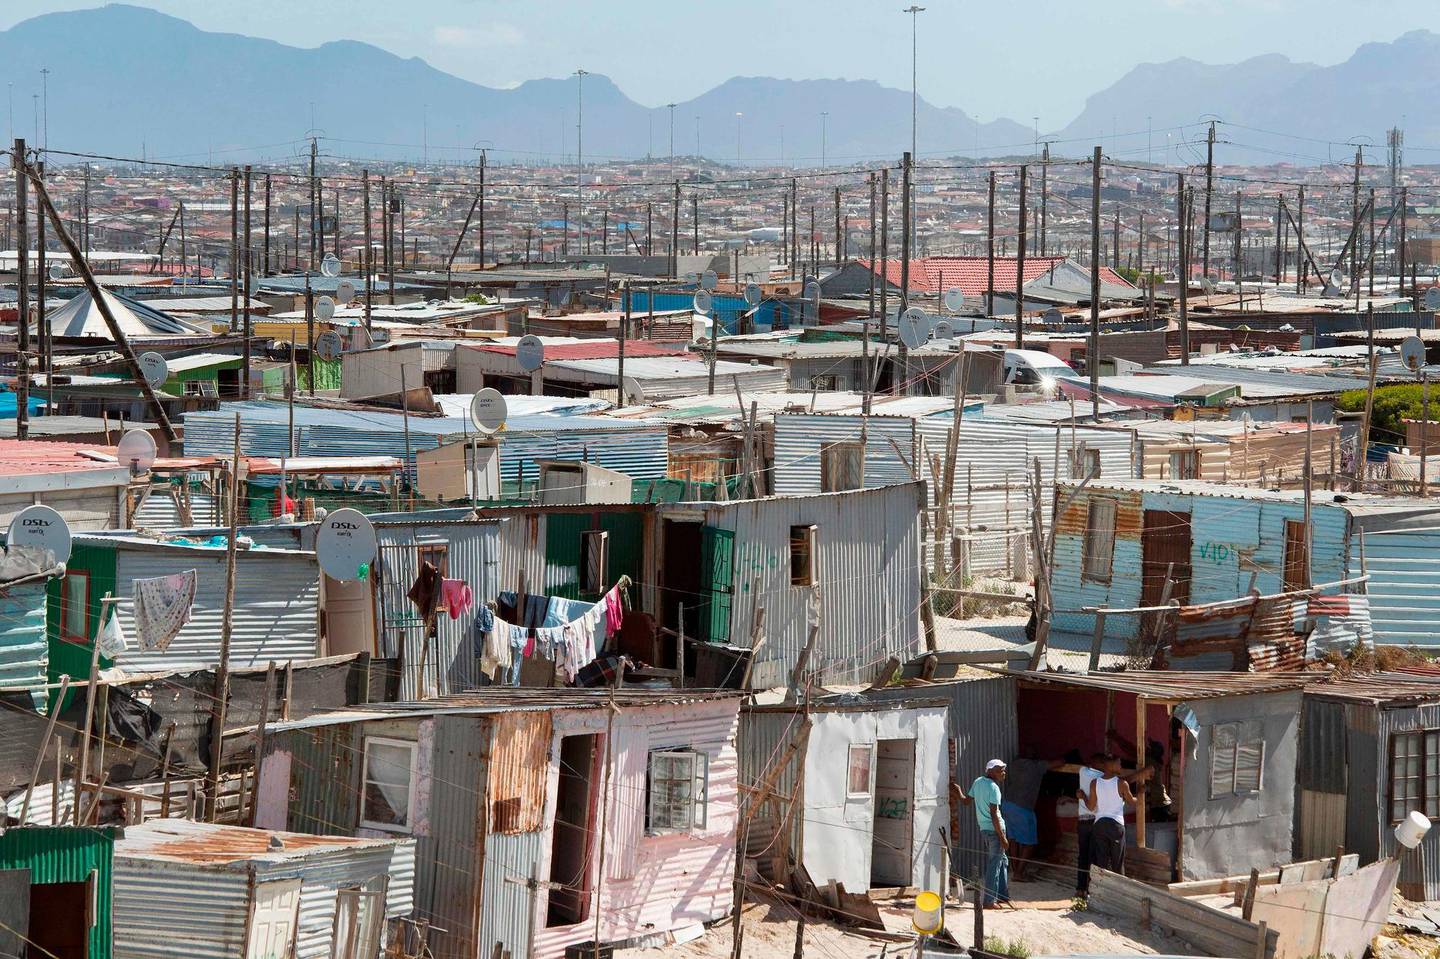 A general view of Khayelitsha, near Cape Town, on March 31, 2020. - Local government administrators in Cape Town said on March 29, 2020, a COVID-19 coronavirus case had been detected in Khayelitsha, the city's largest township, where hundreds of thousands live in shacks. 
An outbreak in the crowded townships where water and sanitation are problematic, could prove difficult to contain in the country which already has the highest number of infections in Africa. (Photo by RODGER BOSCH / AFP)